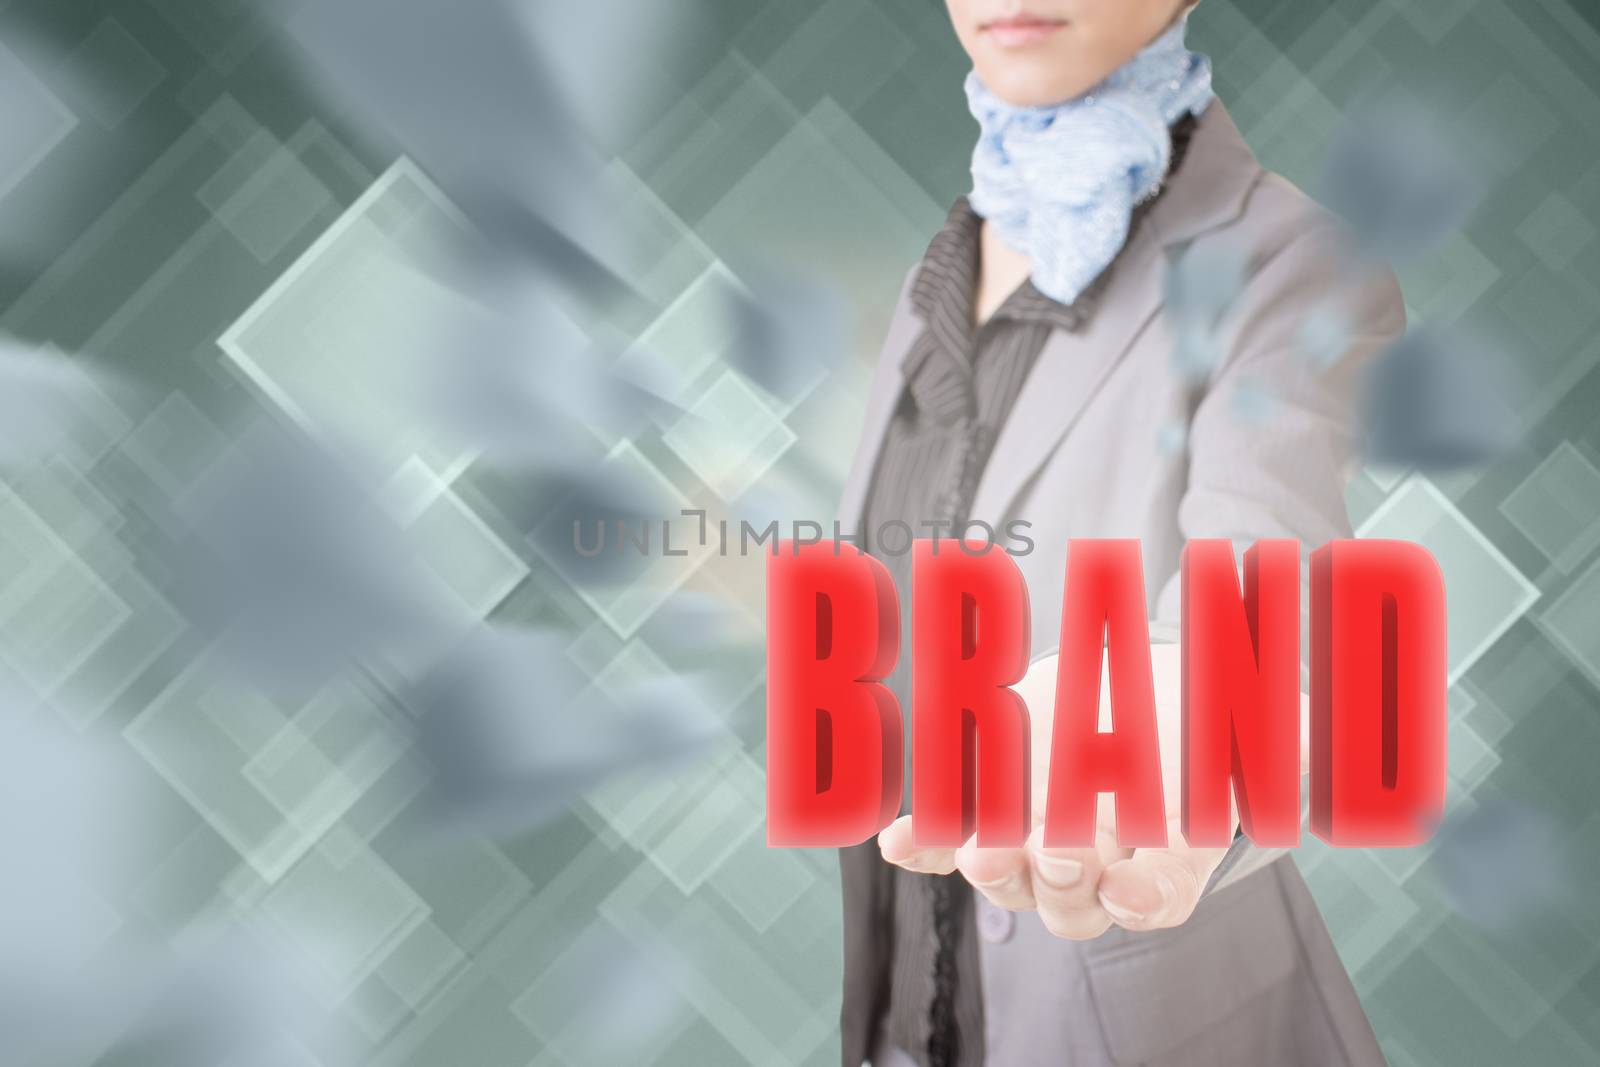 Concept of brand, business woman holding a 3d text.